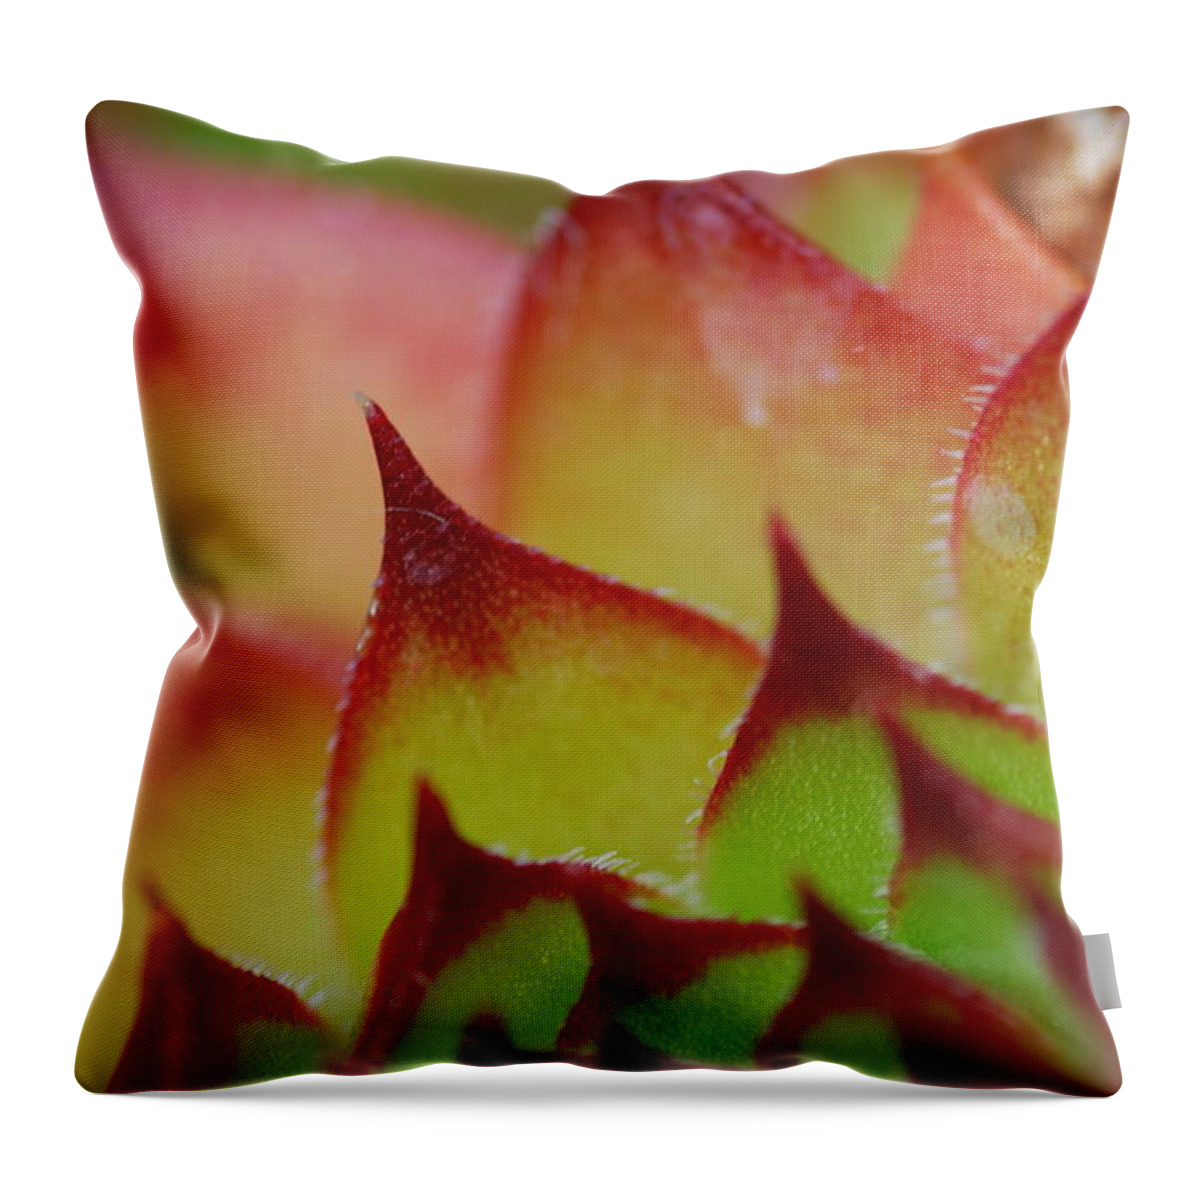 Hens And Chicks Throw Pillow featuring the photograph Hens And Chicks #10 by Stephanie Gambini